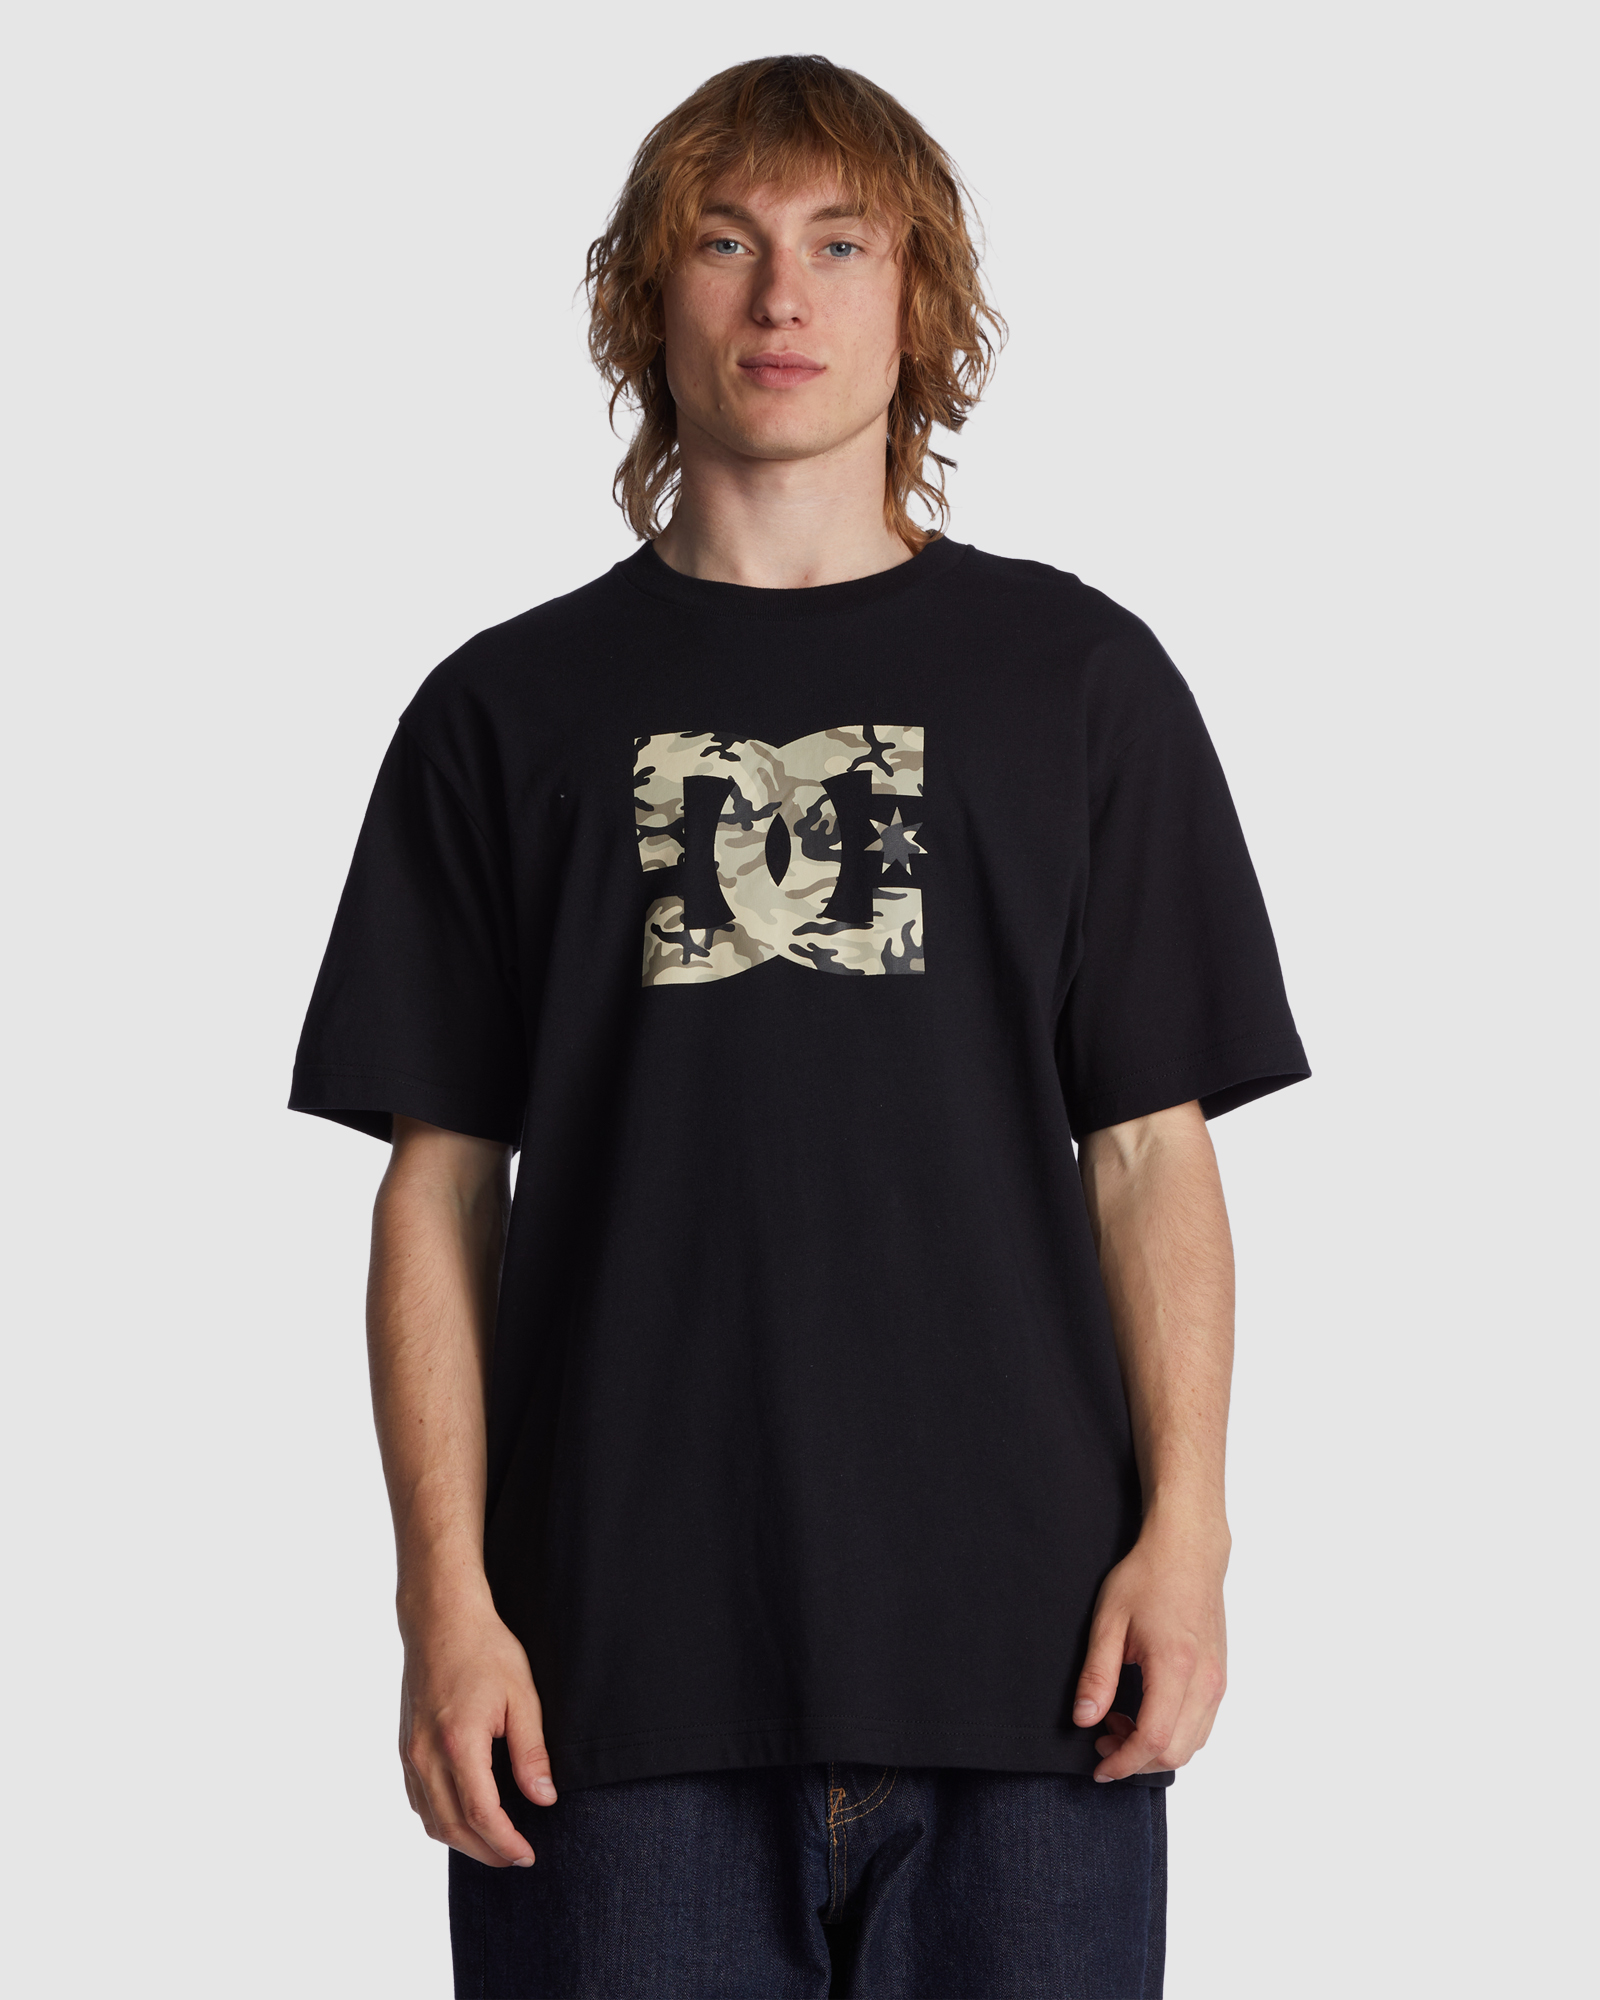 Dc Shoes Men's Dc Star Fill Heritage Tee - Black Stone Camo | SurfStitch